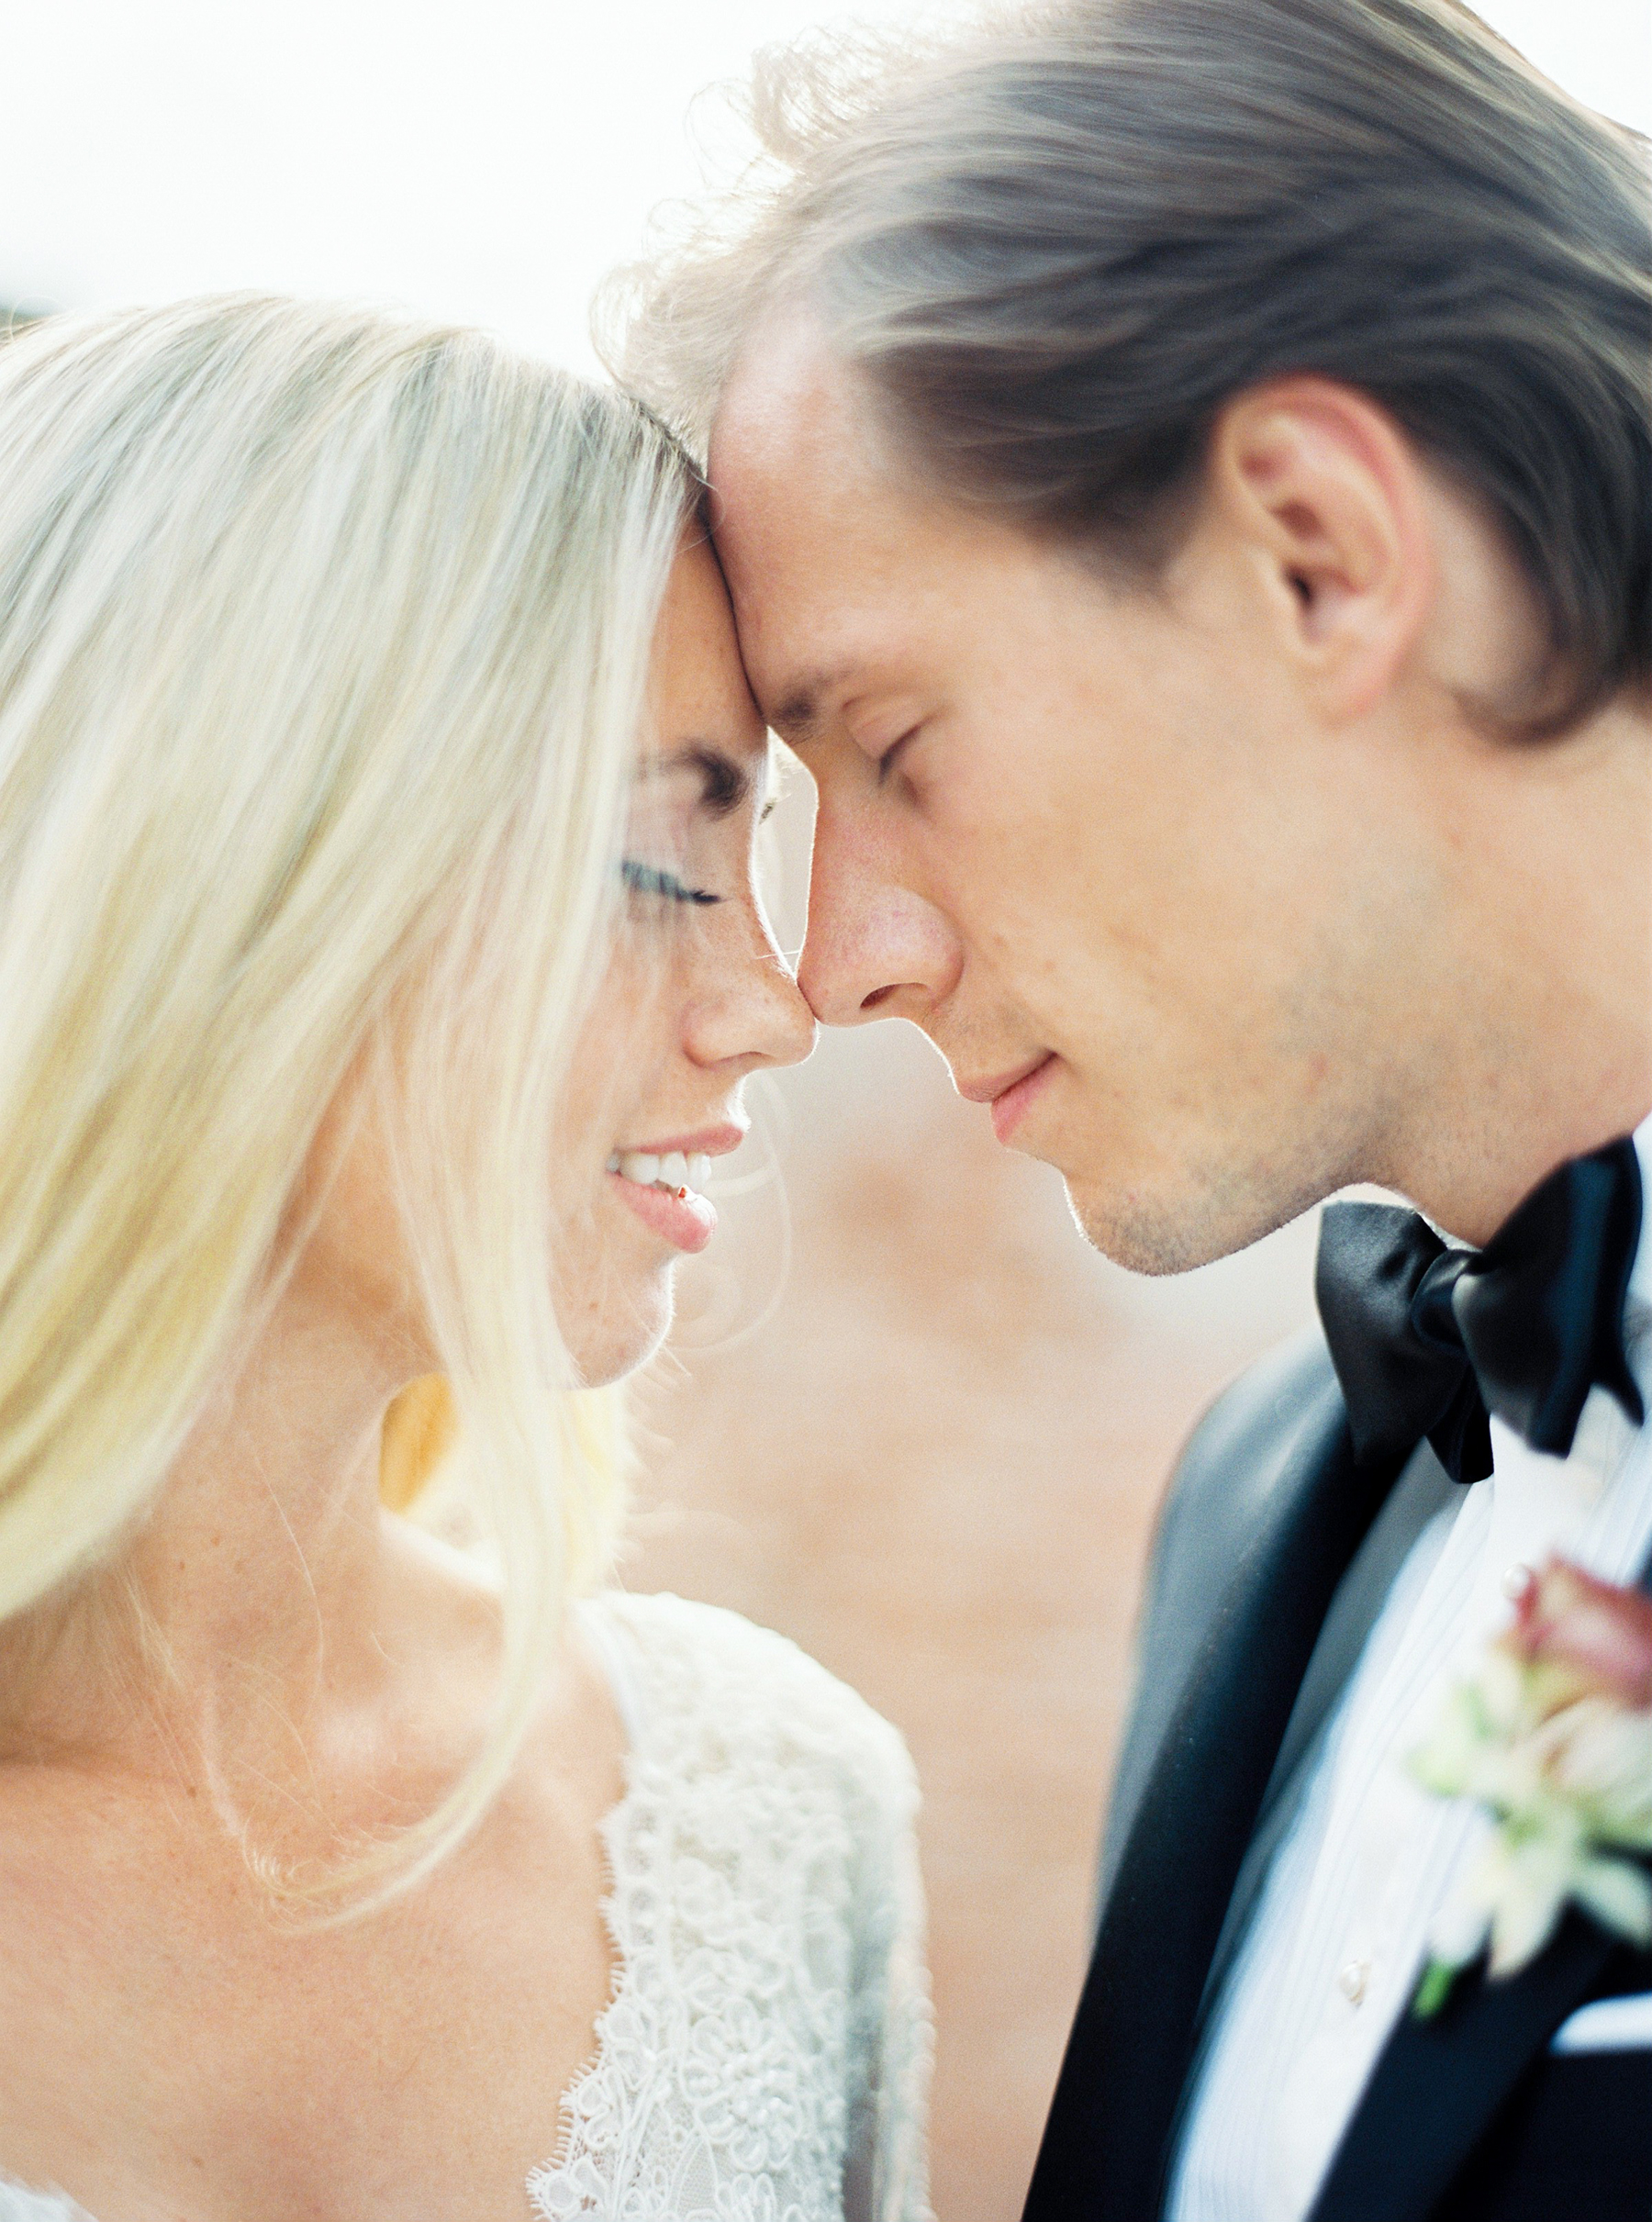 Bright and Warm Colored Wedding Inspiration in Sweden 2 Brides Photography28